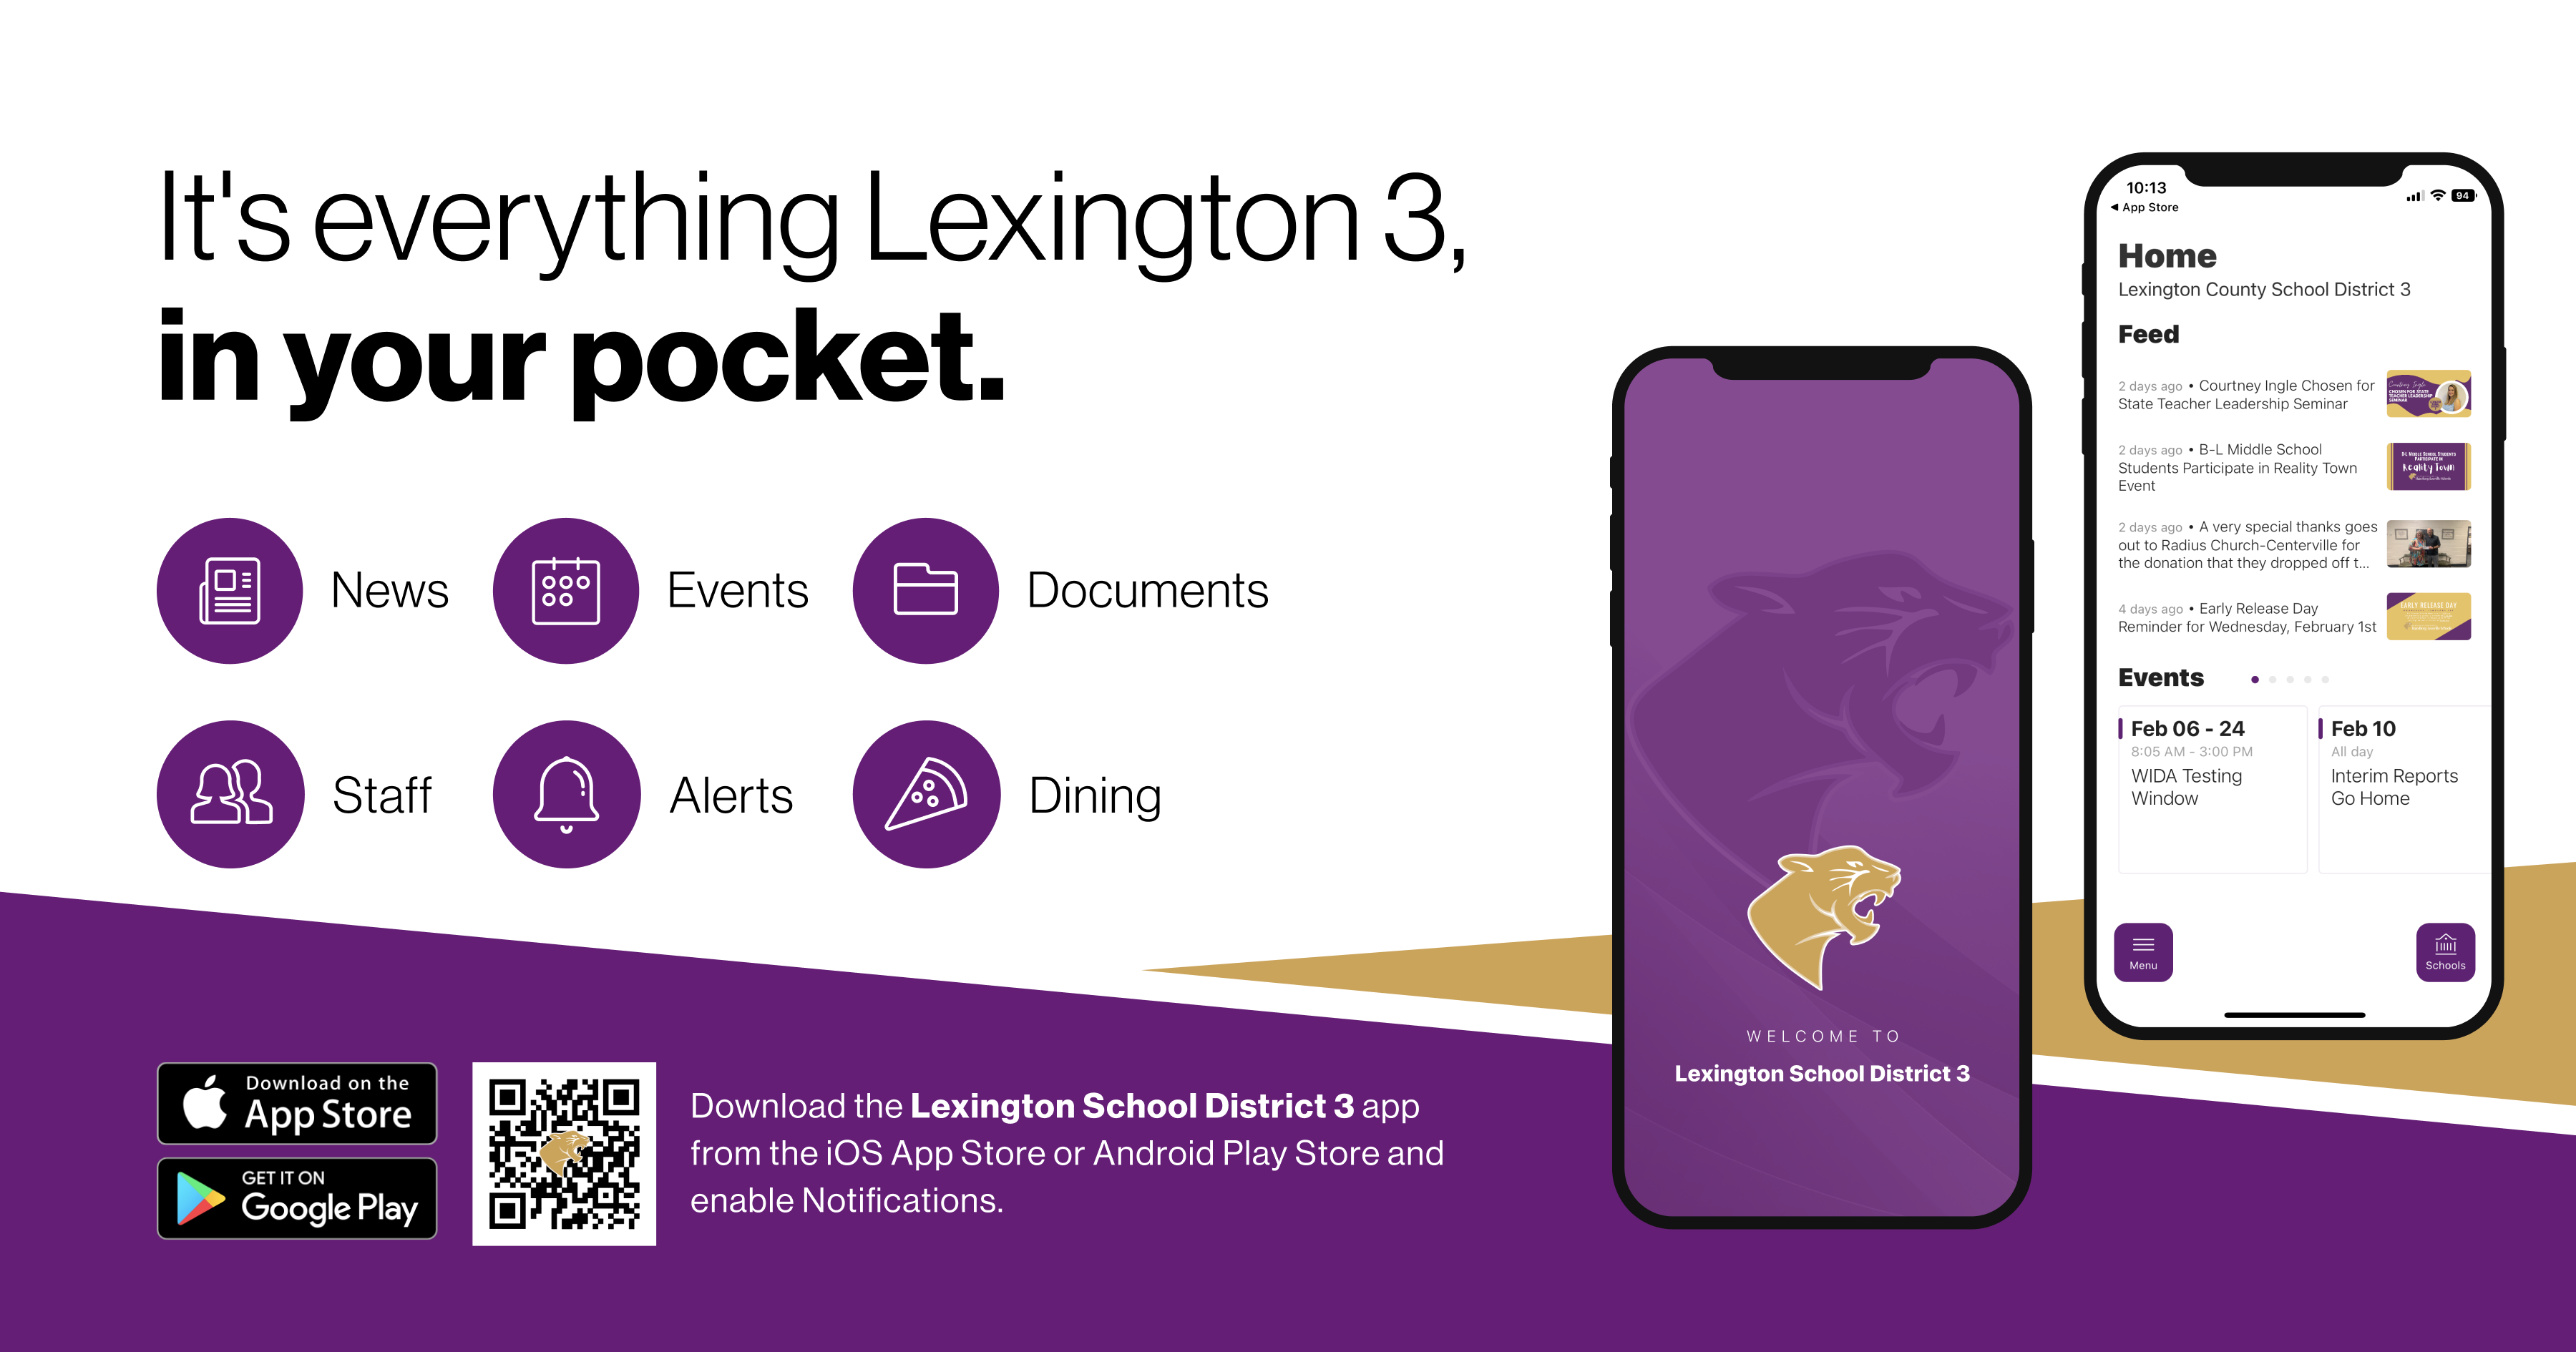 Lexington 3 Mobile App - Download on Google Play and Apple Store